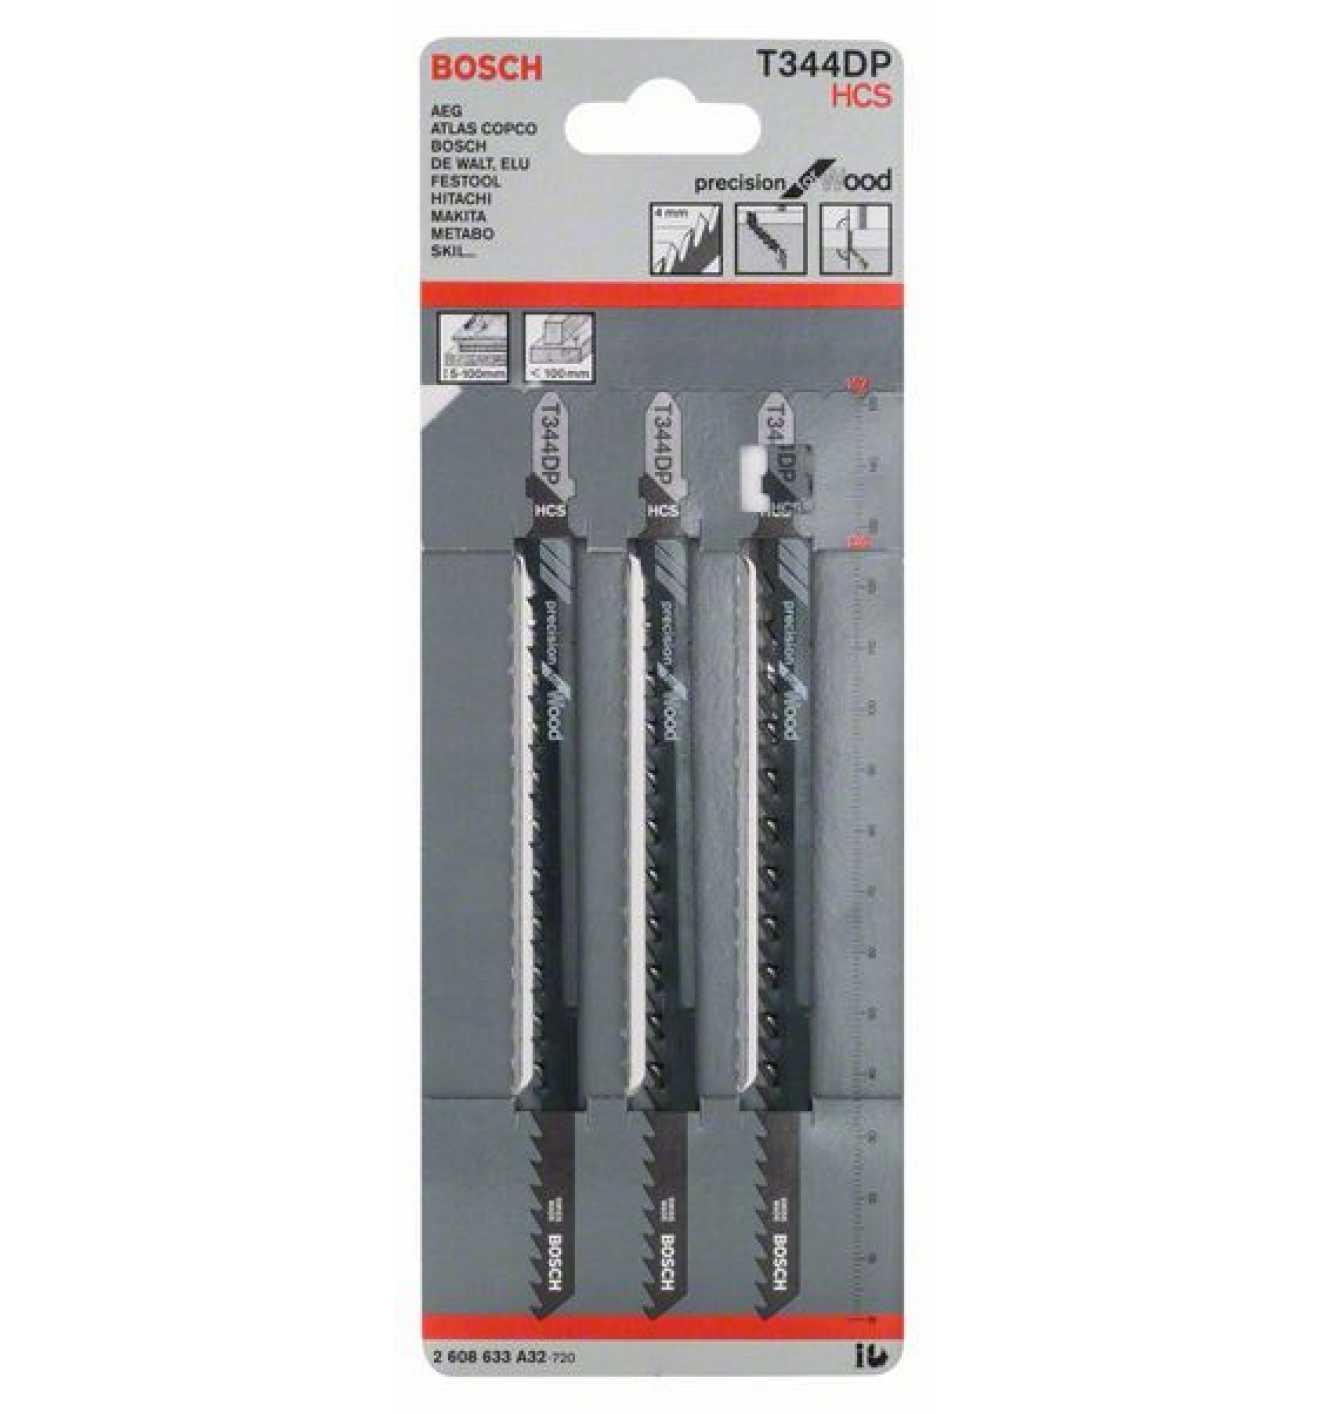 Bosch Jigsaw Blades HCS T 344 DP Precision for Wood 3 Pack 2608633A32 Power Tool Services